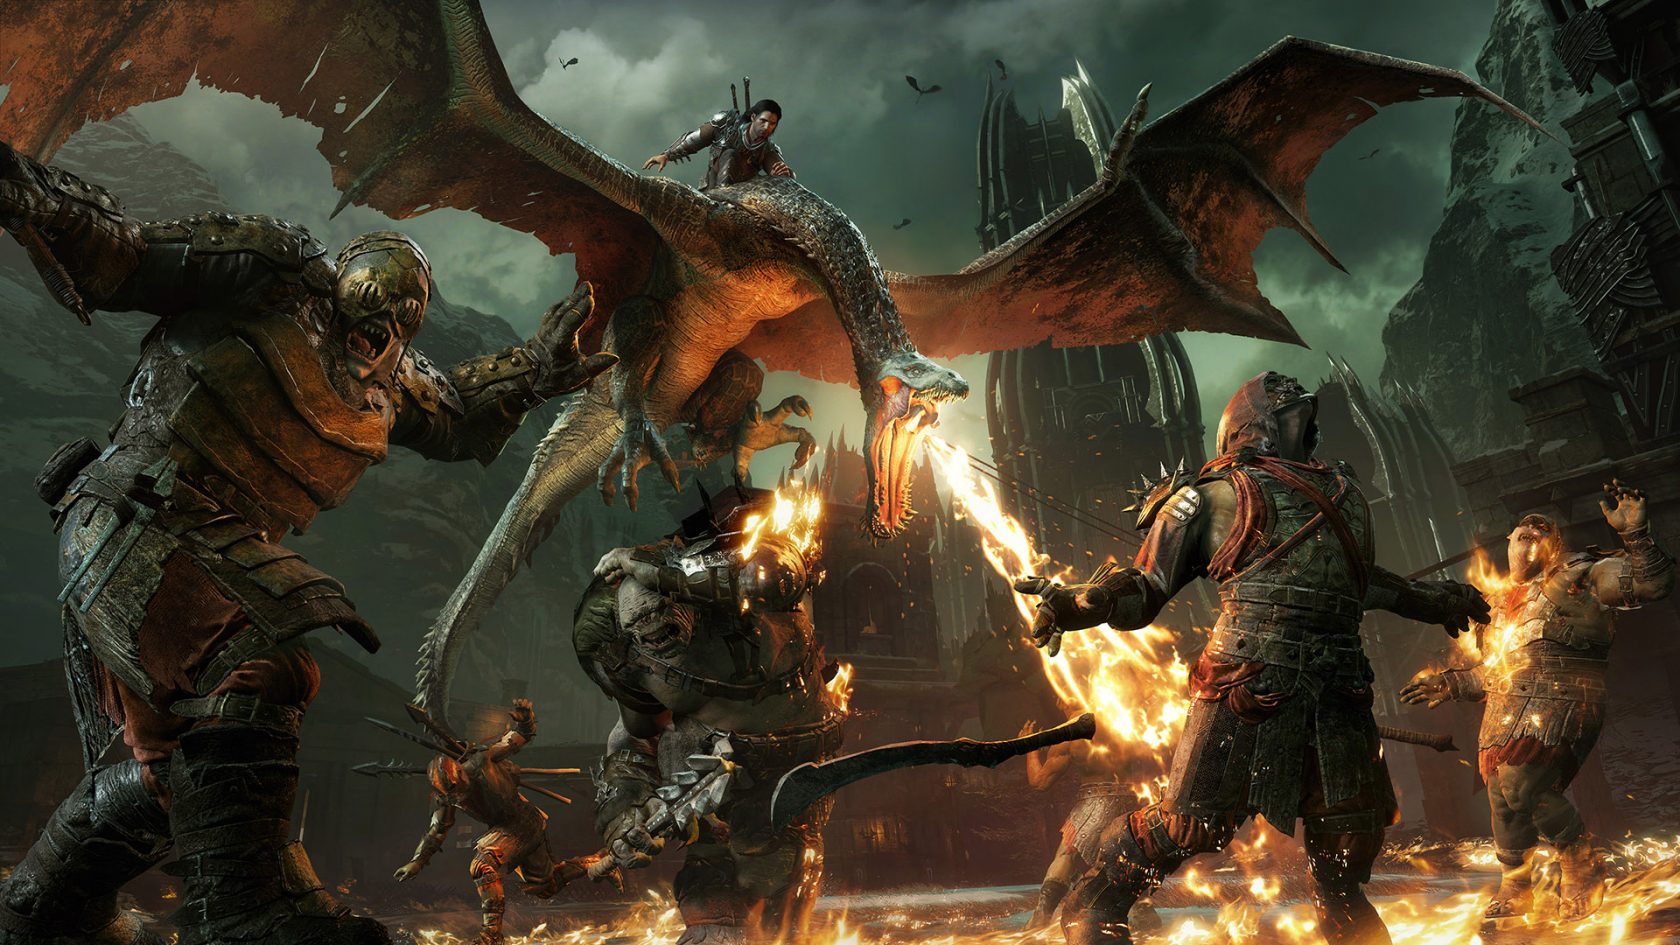 Shadow of War is getting rid of its microtransactions